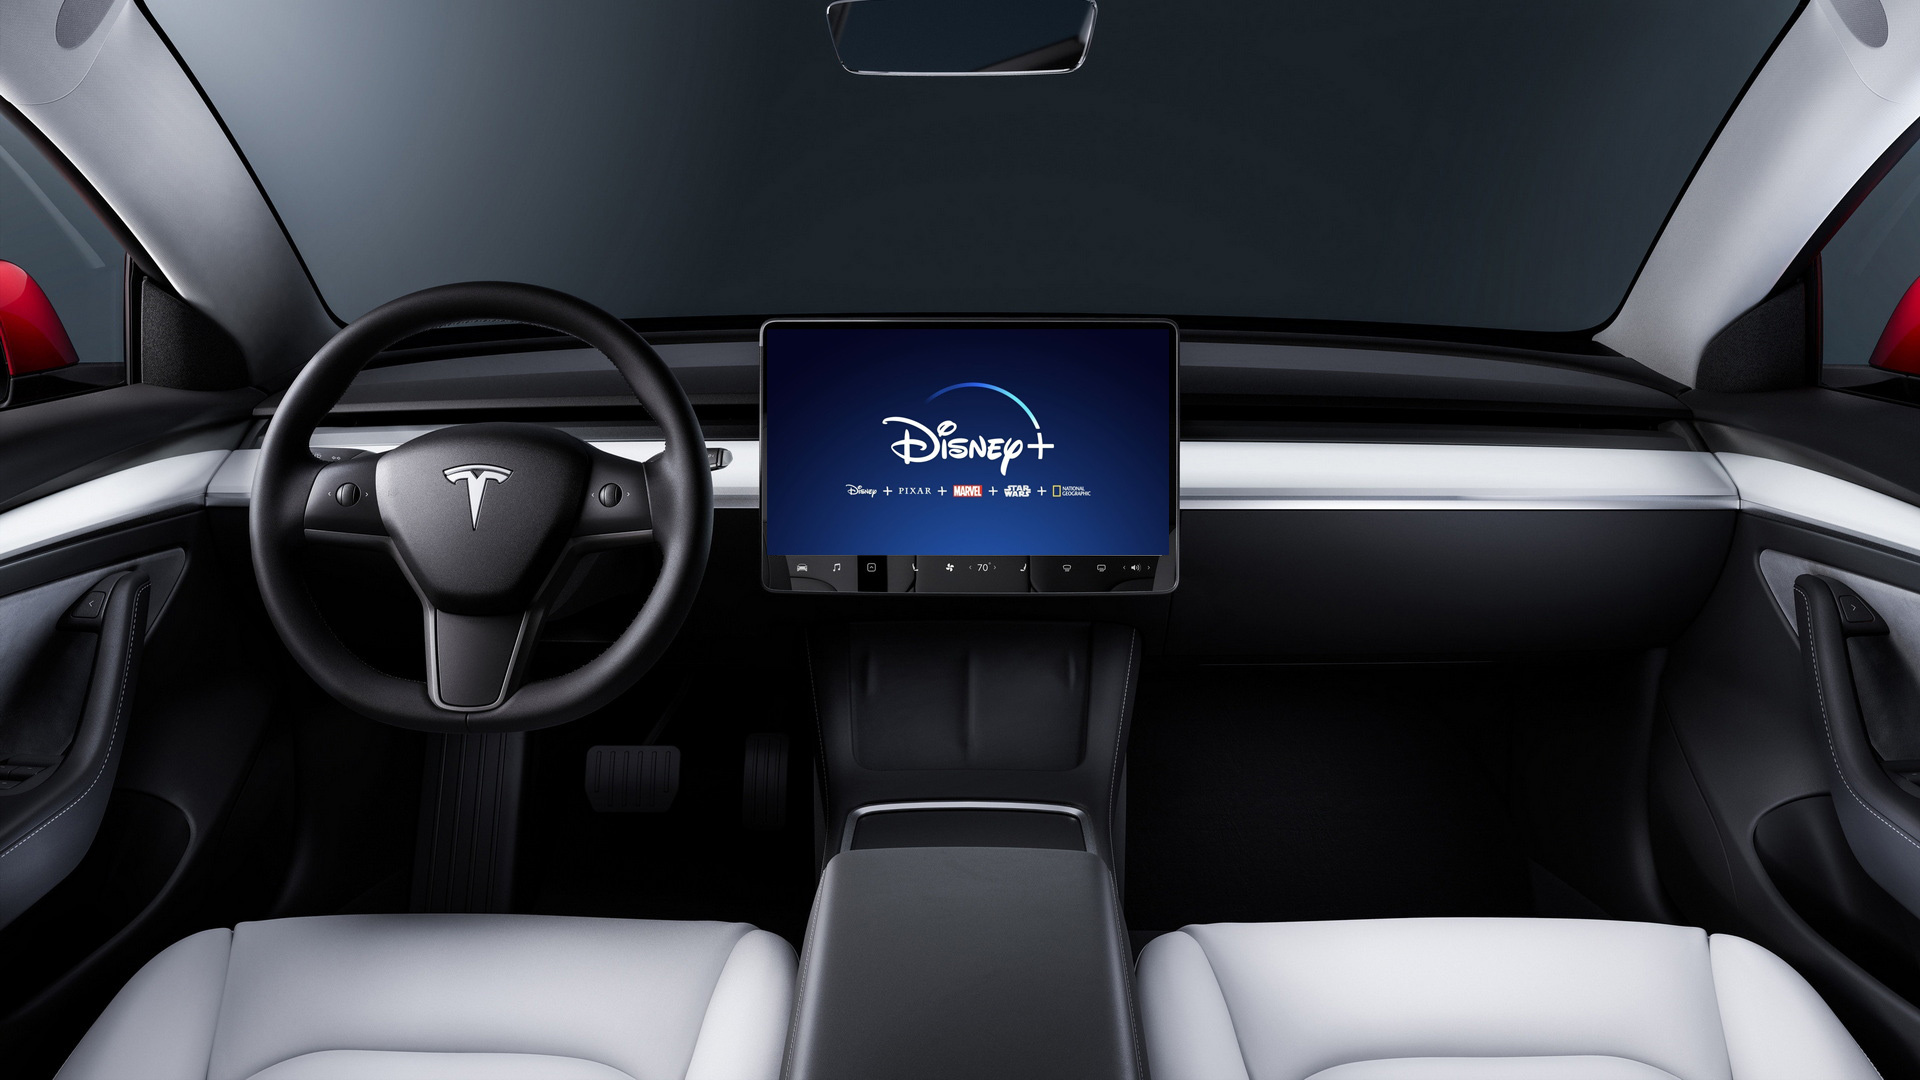 Tesla Removes Disney+ From Its Cars, Likely Due To Musk’s War On Bob